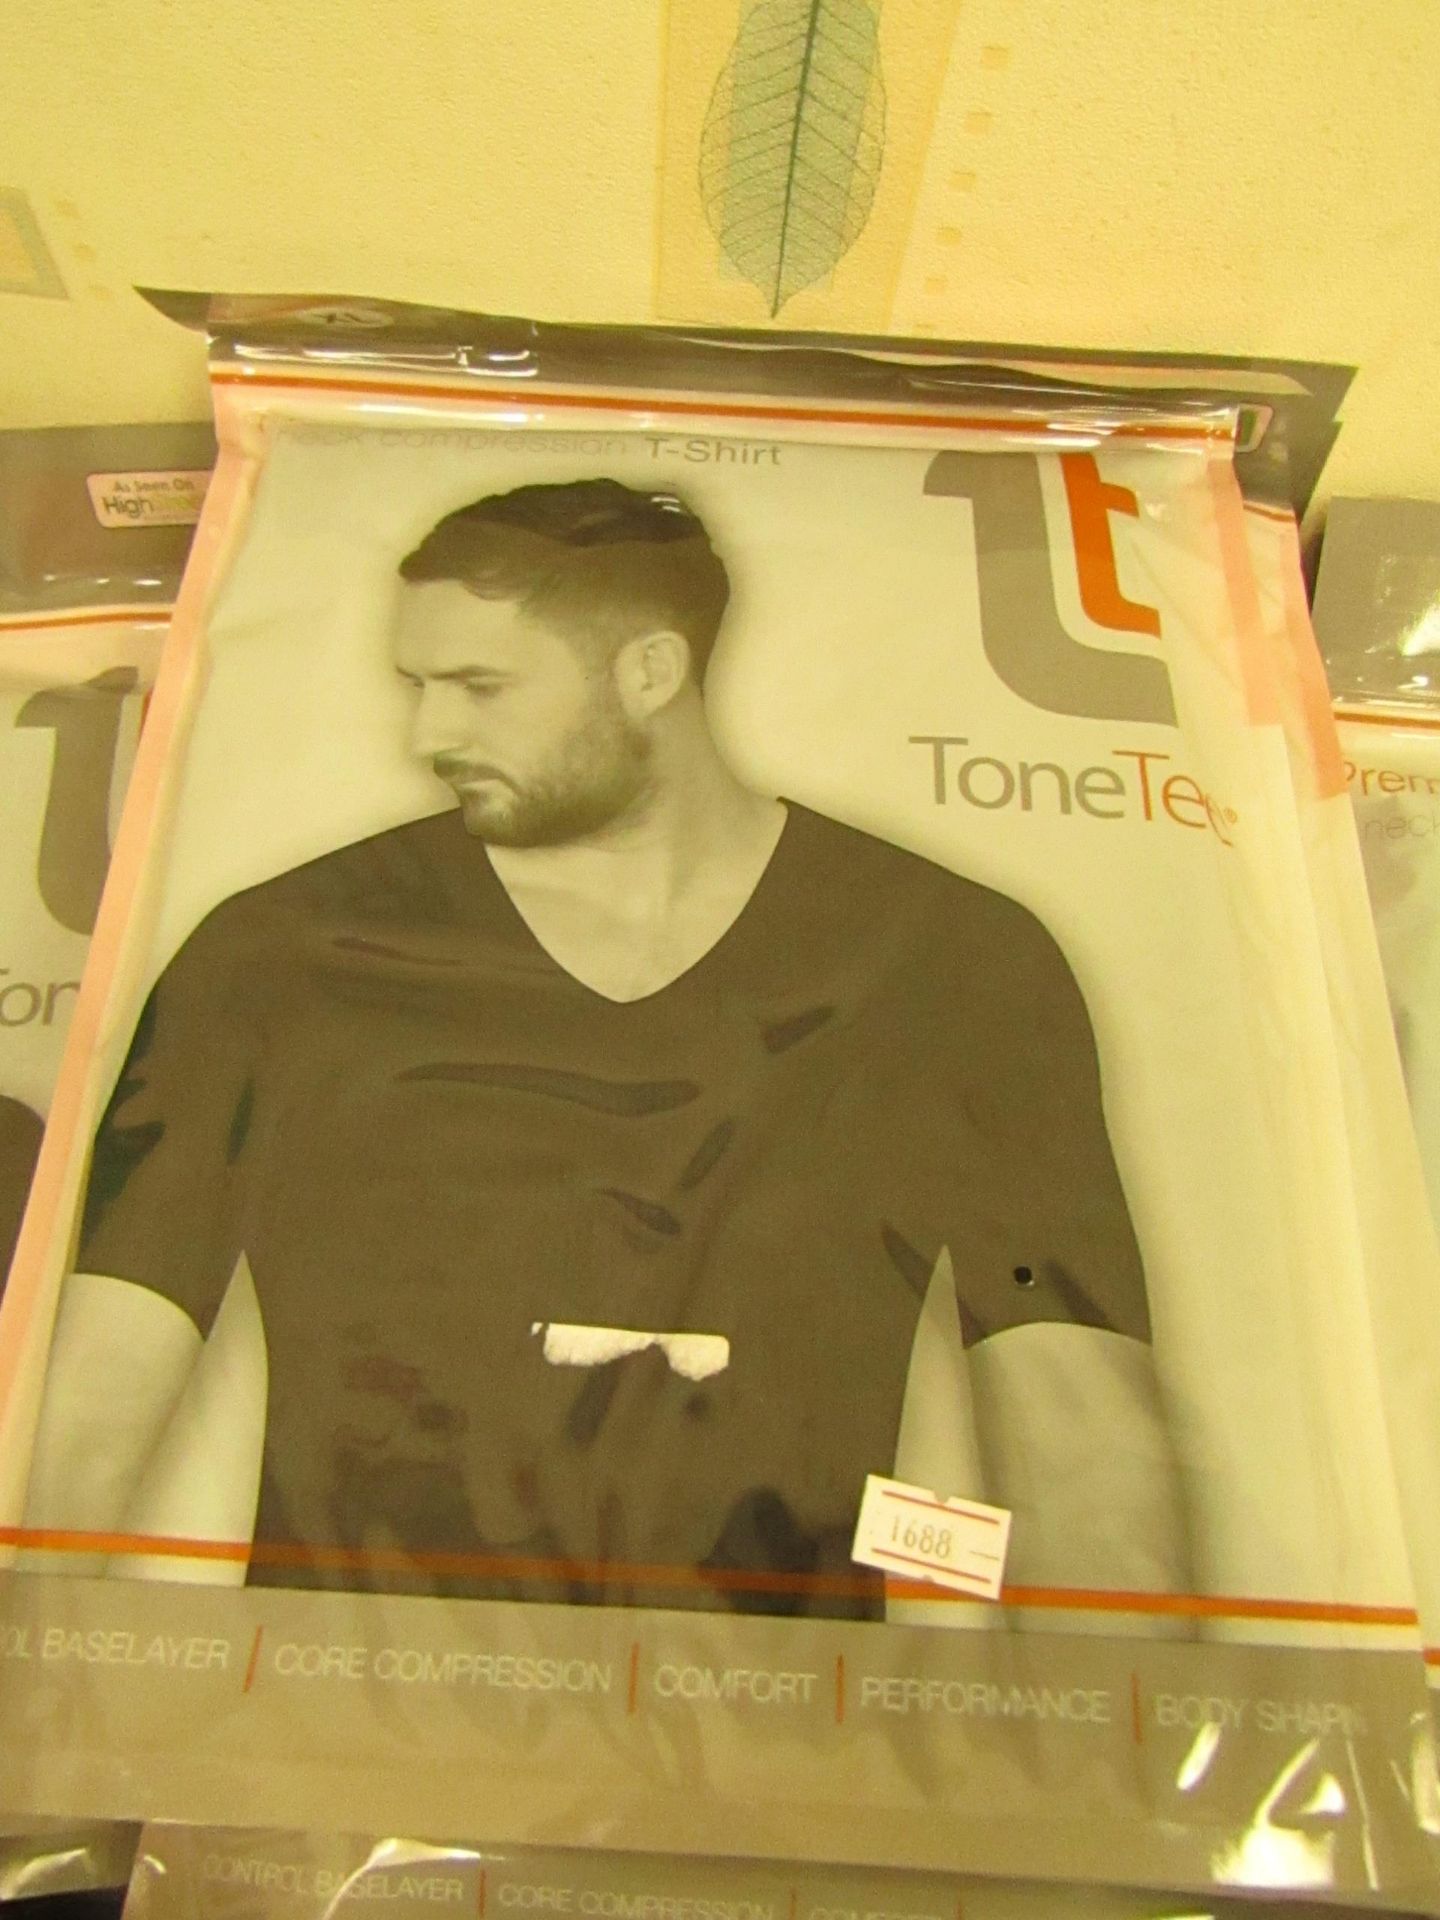 | 1x | MENS TONE TEE NECK COMPRESSION T-SHIRT BLACK SIZE L | NEW & PACKAGED |